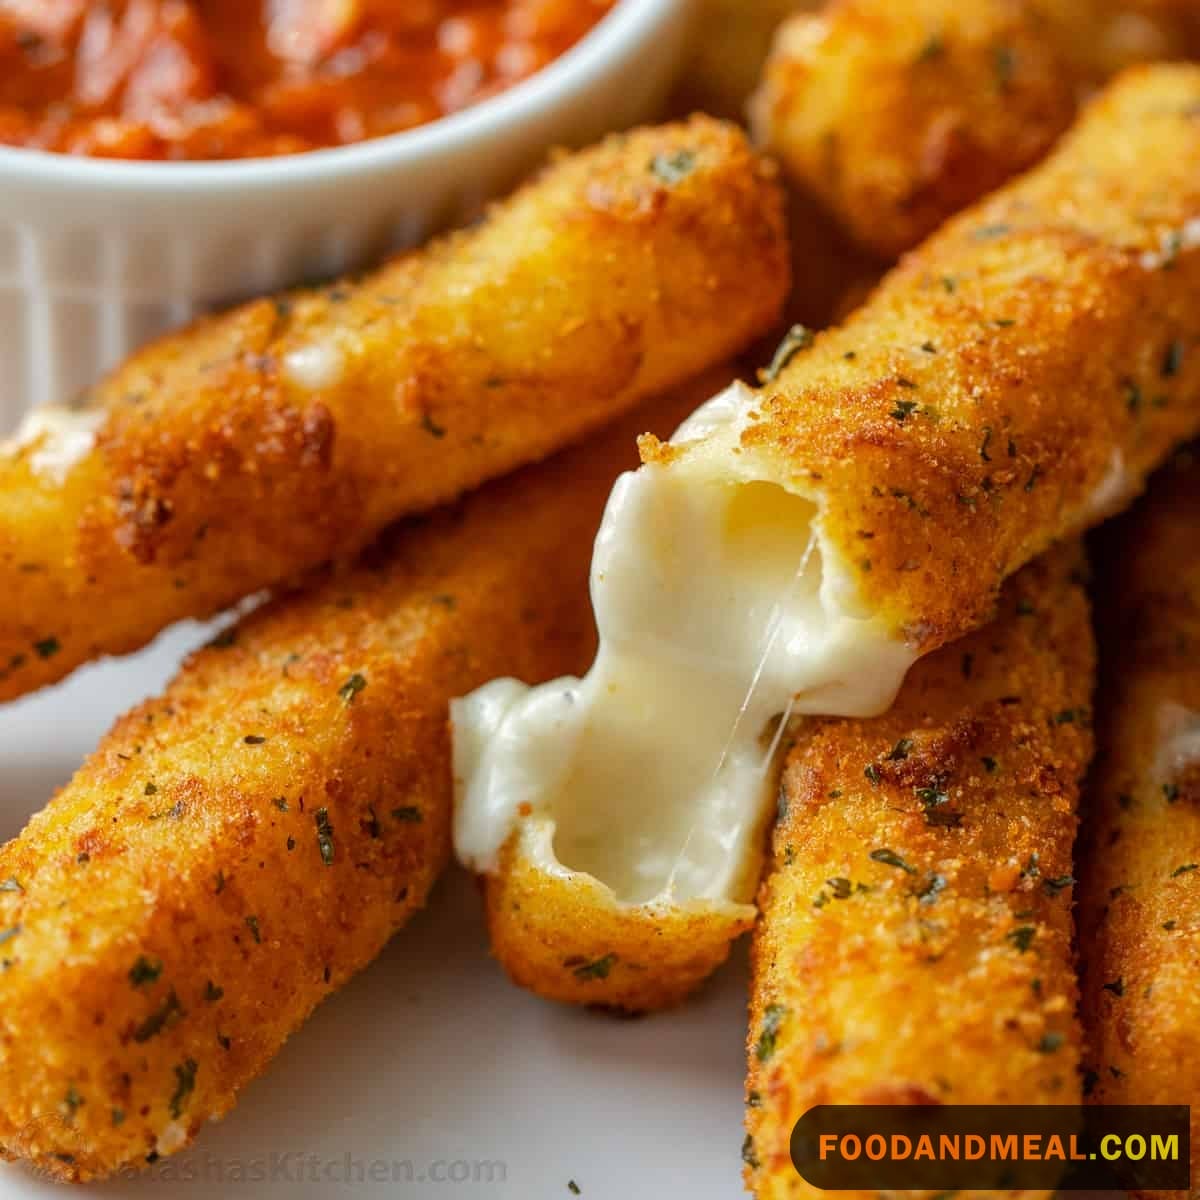 The Art Of Crafting The Perfect Mozzarella Stick - In Action!